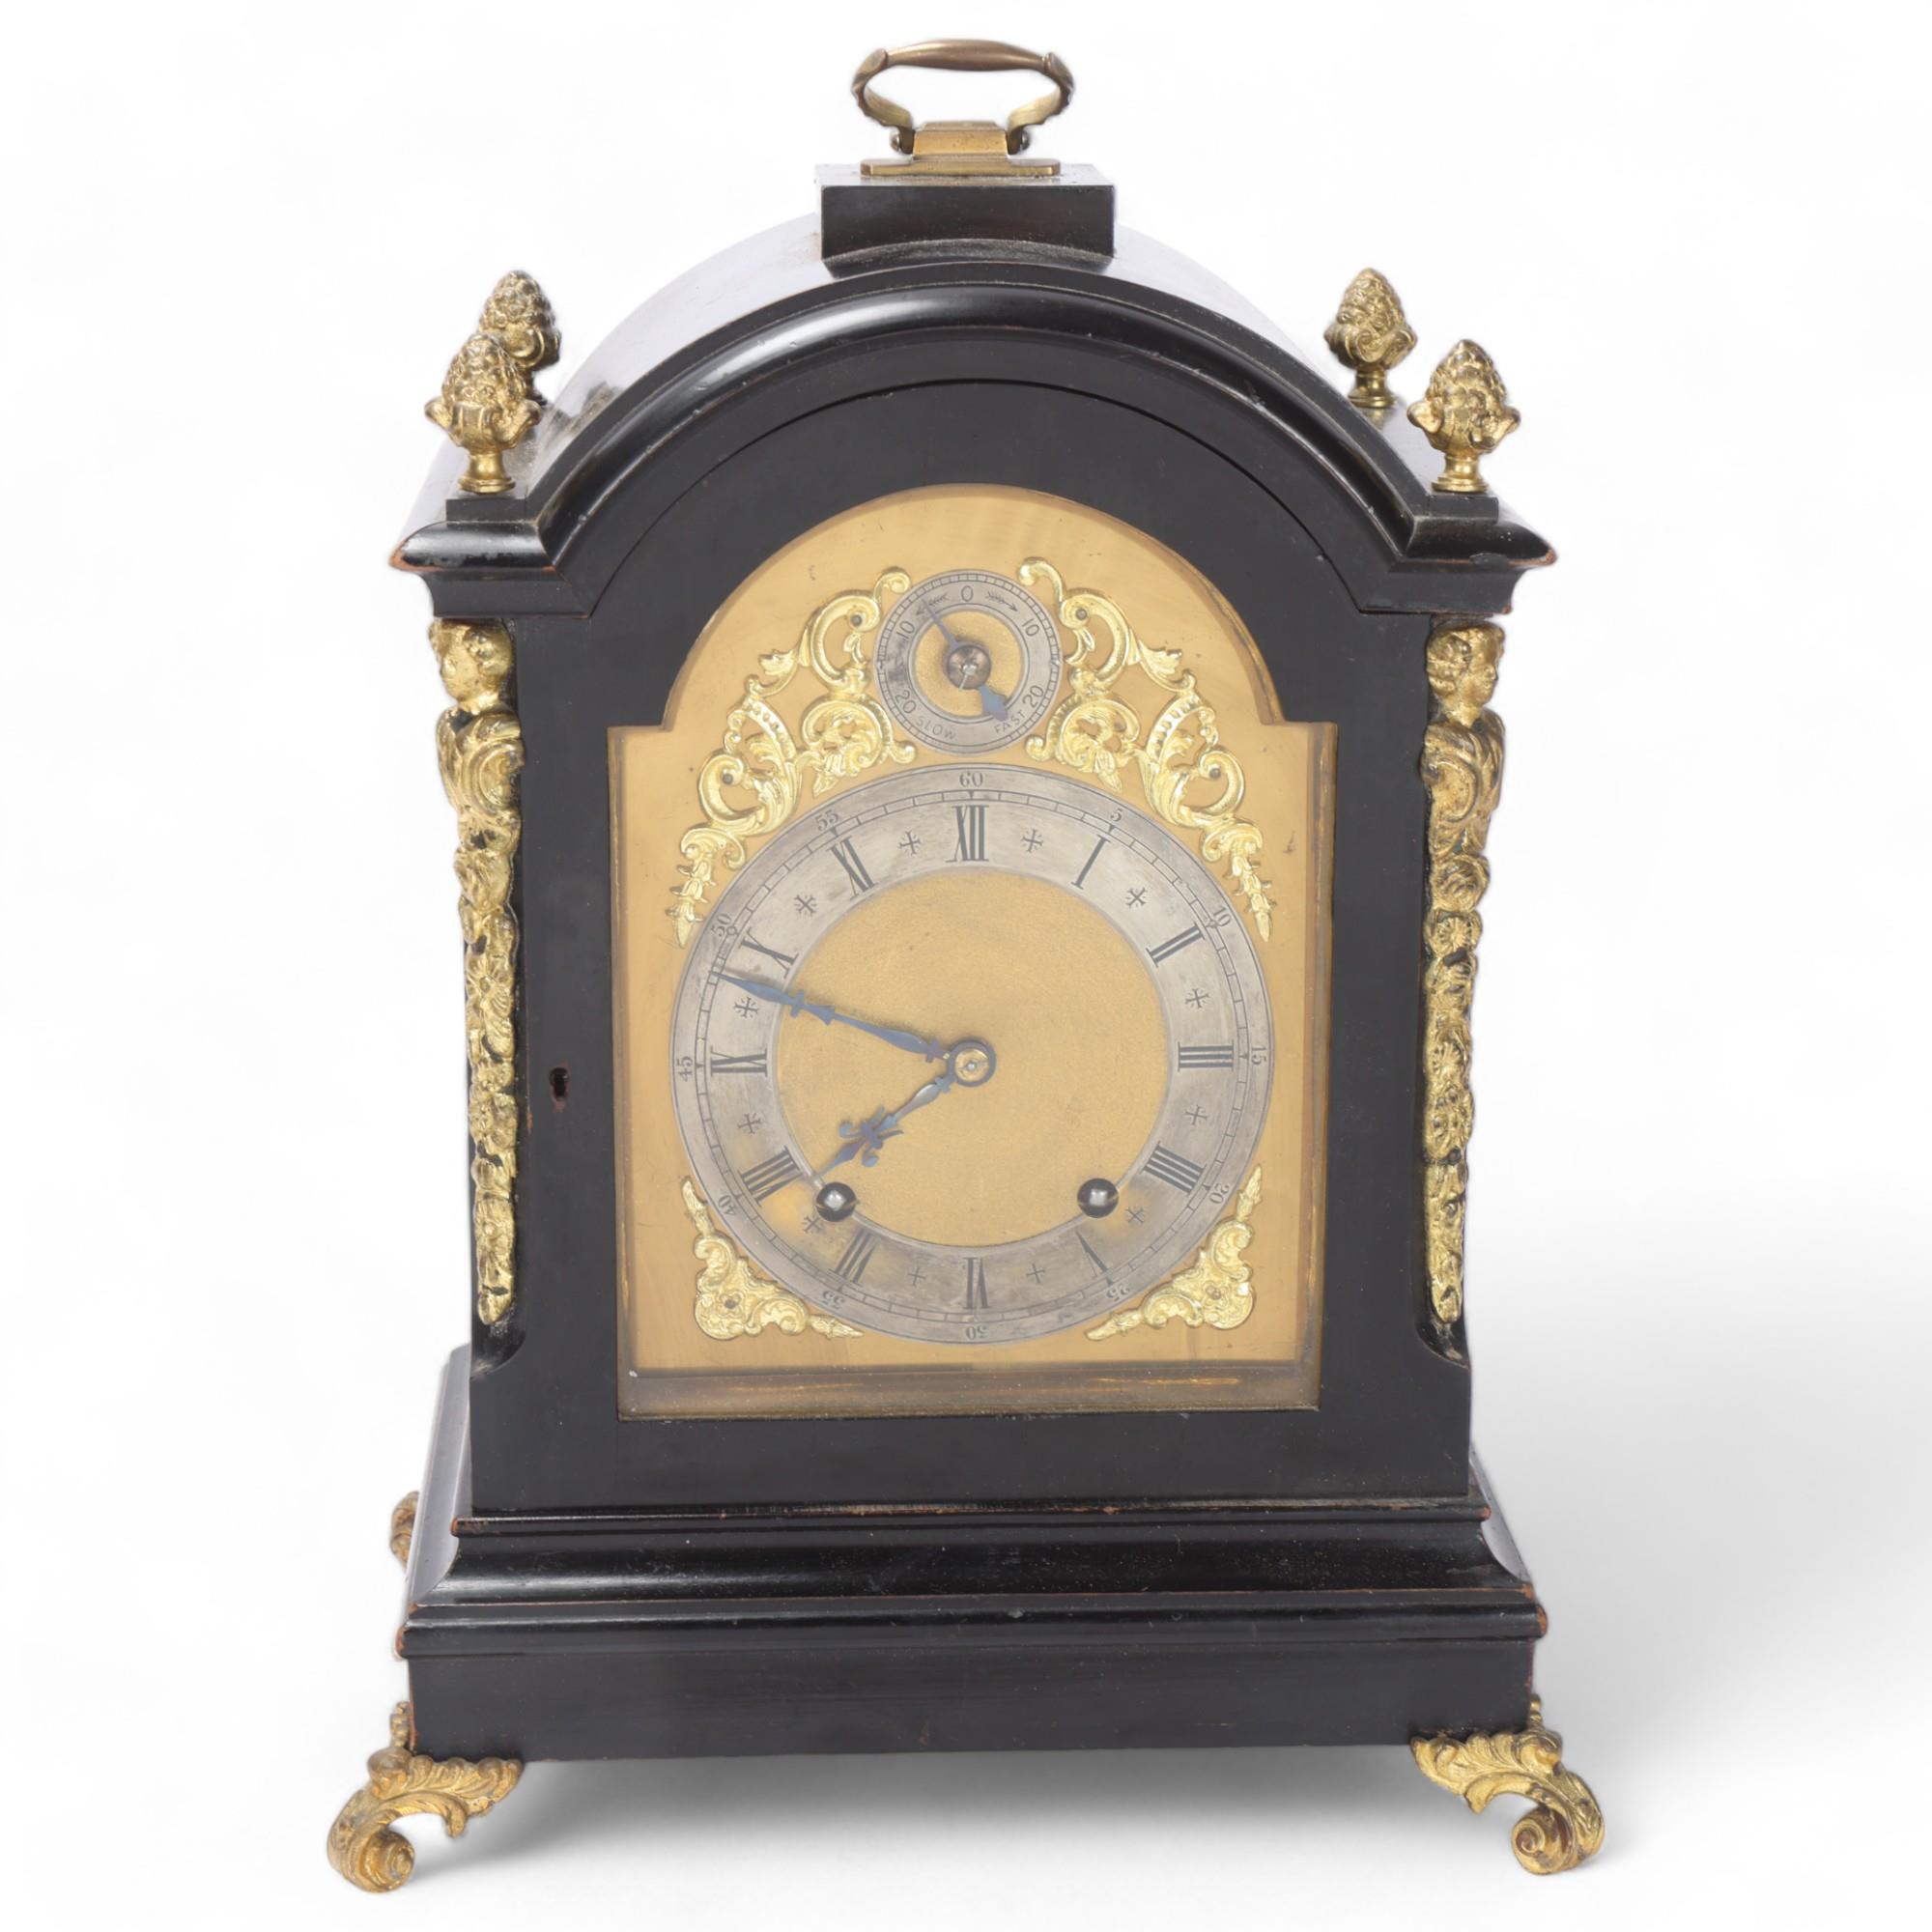 A Victorian ebonised dome-top bracket clock in Georgian style, with gilt-bronze mounts, 8-day